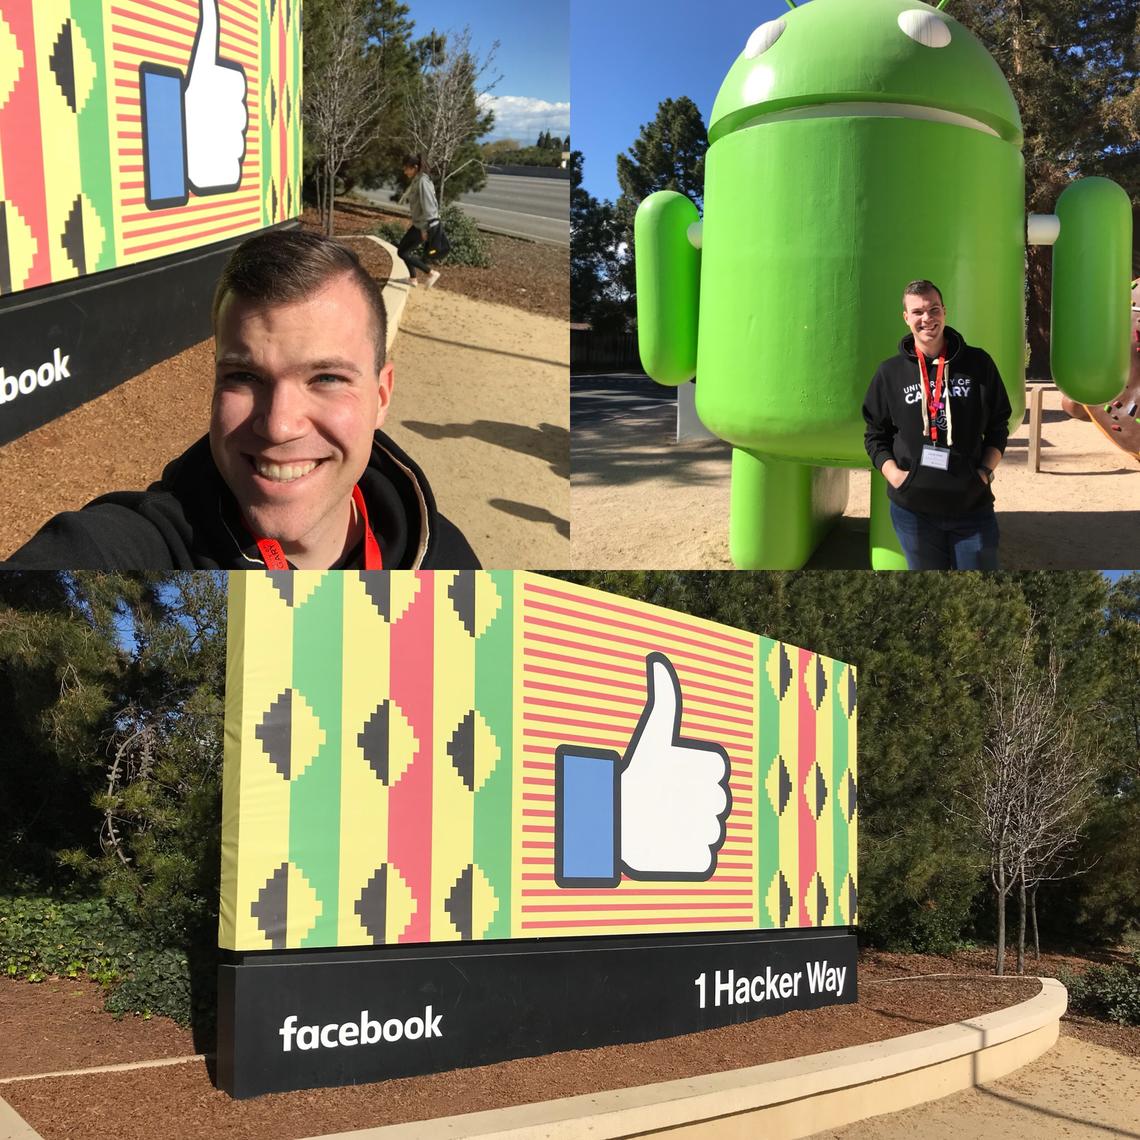 Tour participant and Faculty of Arts student Jonah Zankl shares some photos from the Facebook and Google campuses.